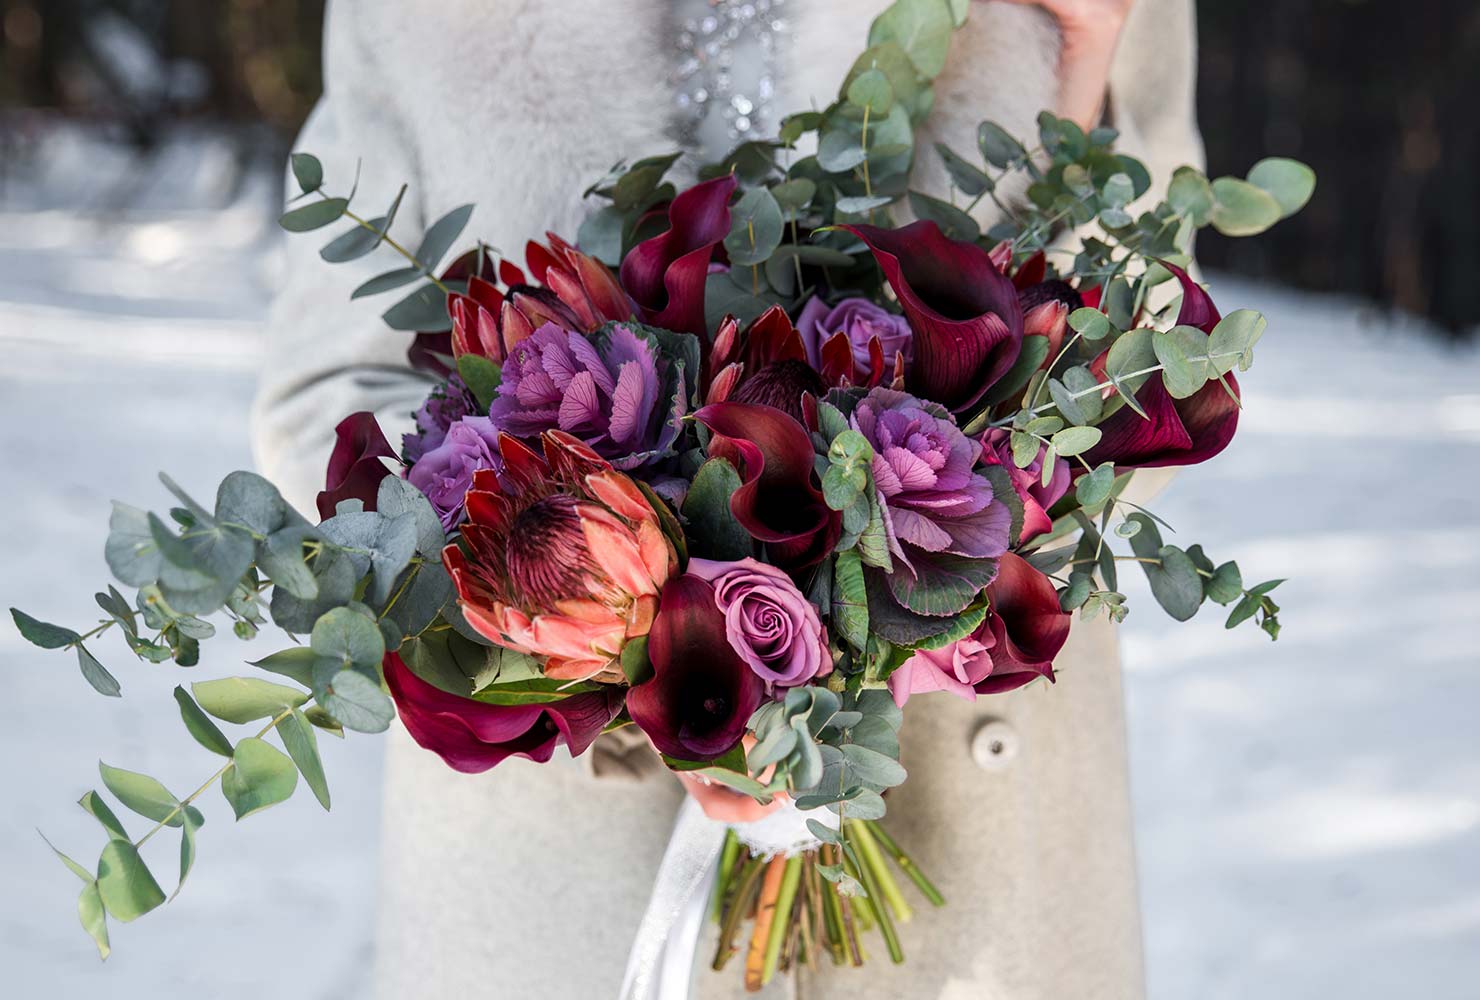 purple and red wedding bouquet